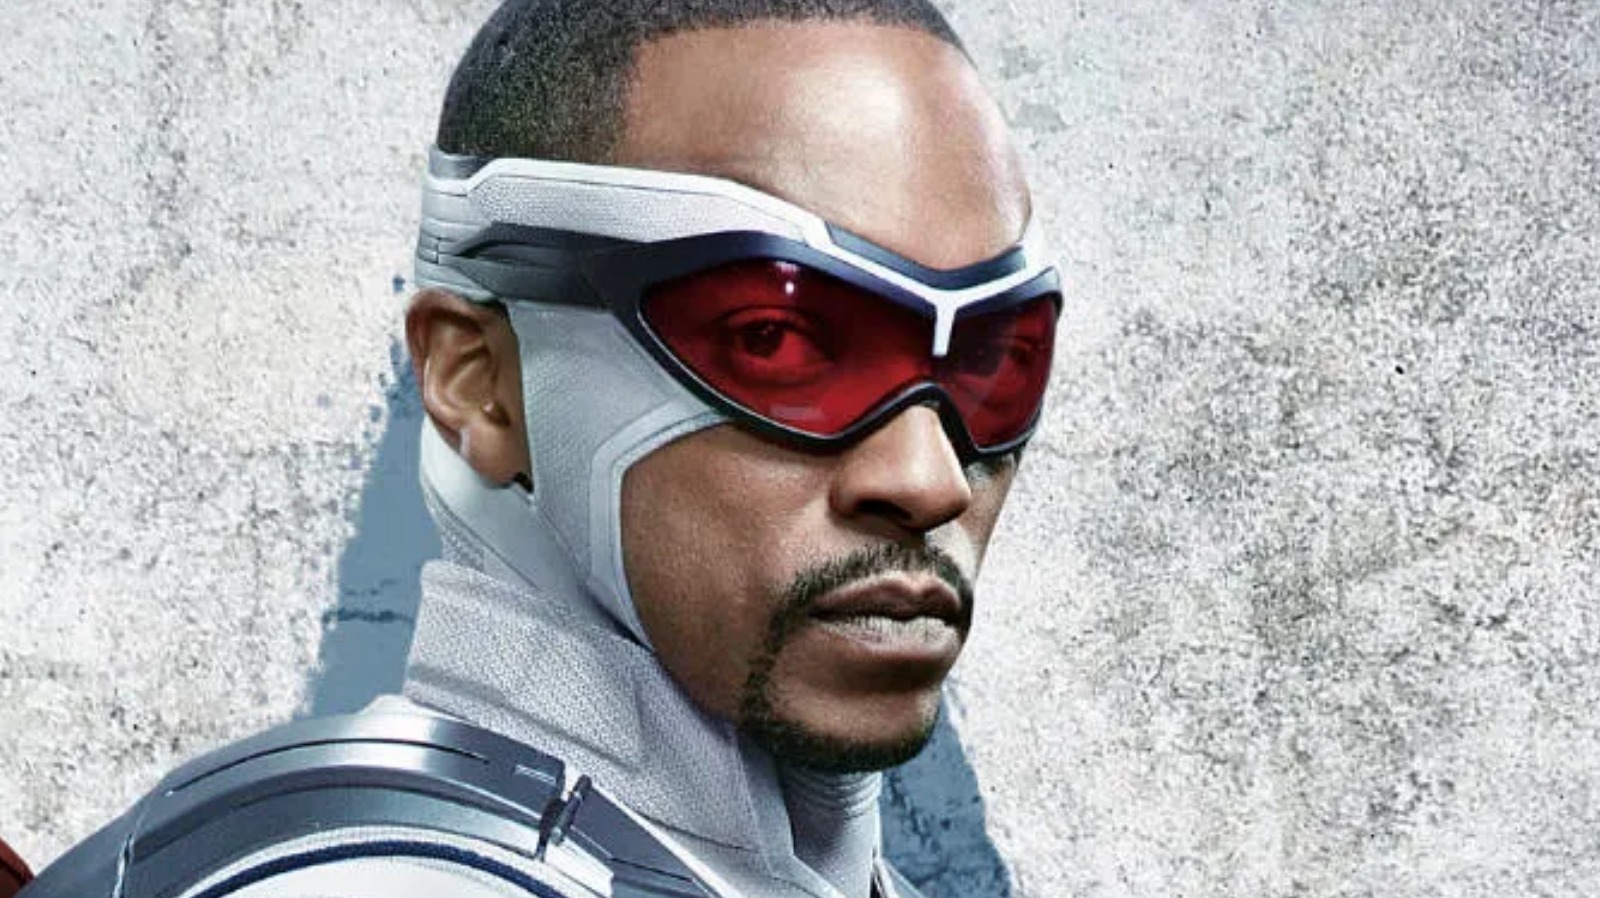 Watch falcon and the winter soldier